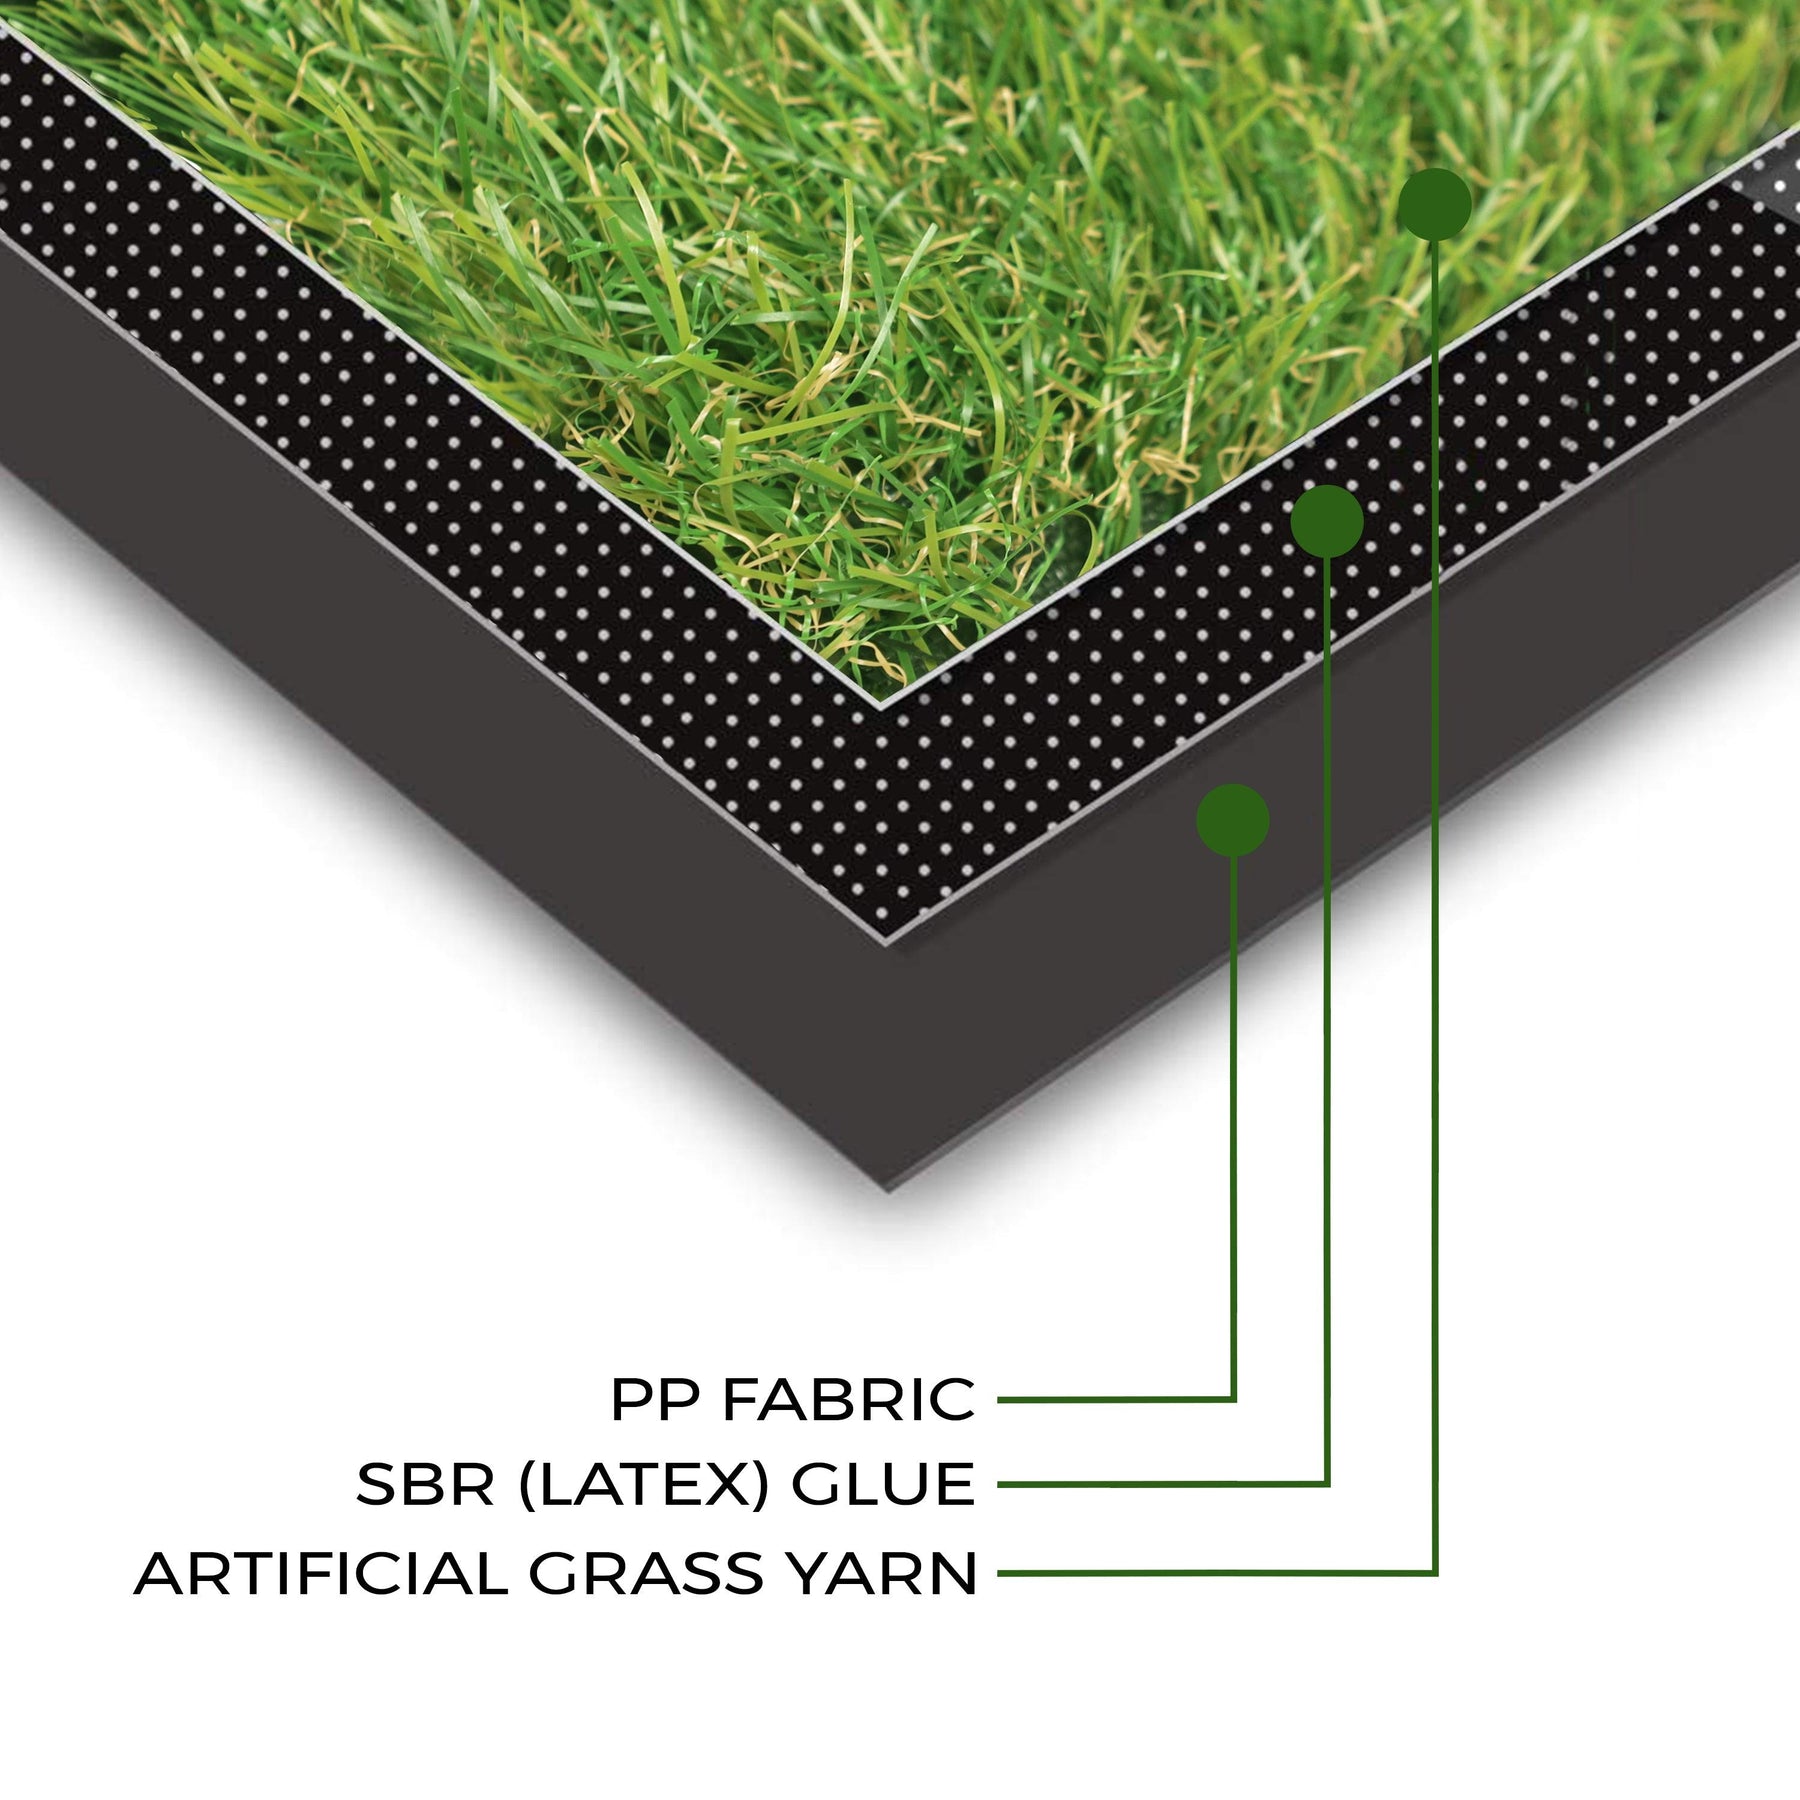  Superior Realistic Indoor or Outdoor Artificial Grass/ Turf - Green